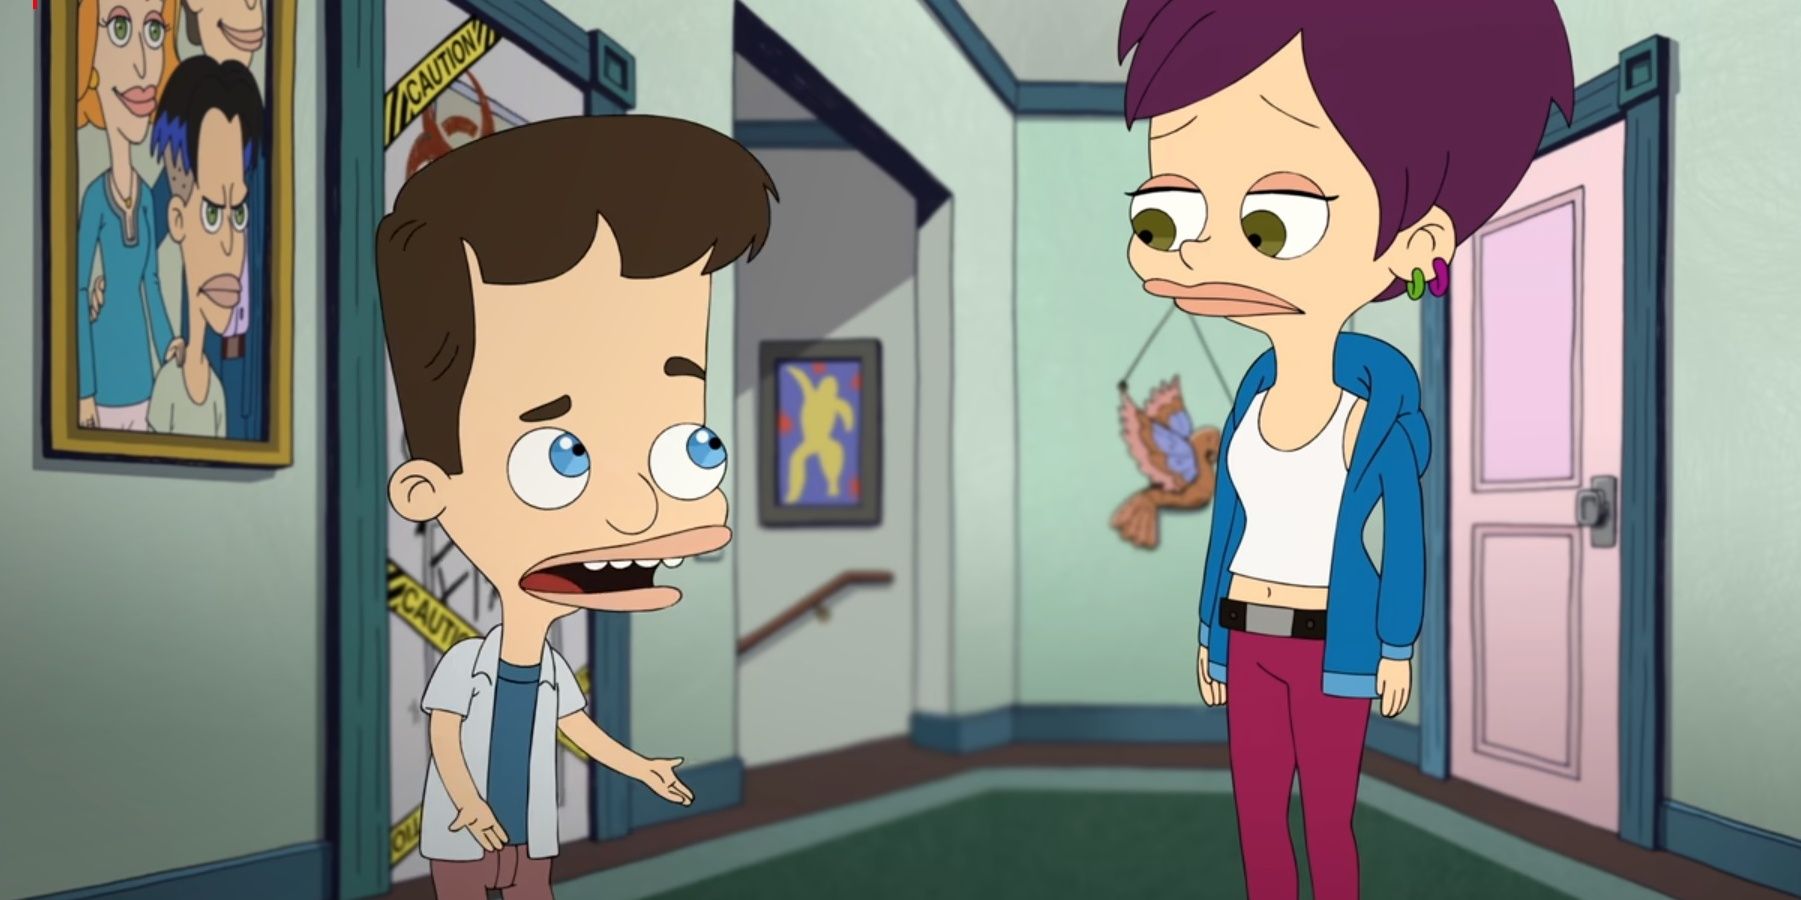 Nick Birch and Tallulah Levine in The Head Push episode of Big Mouth